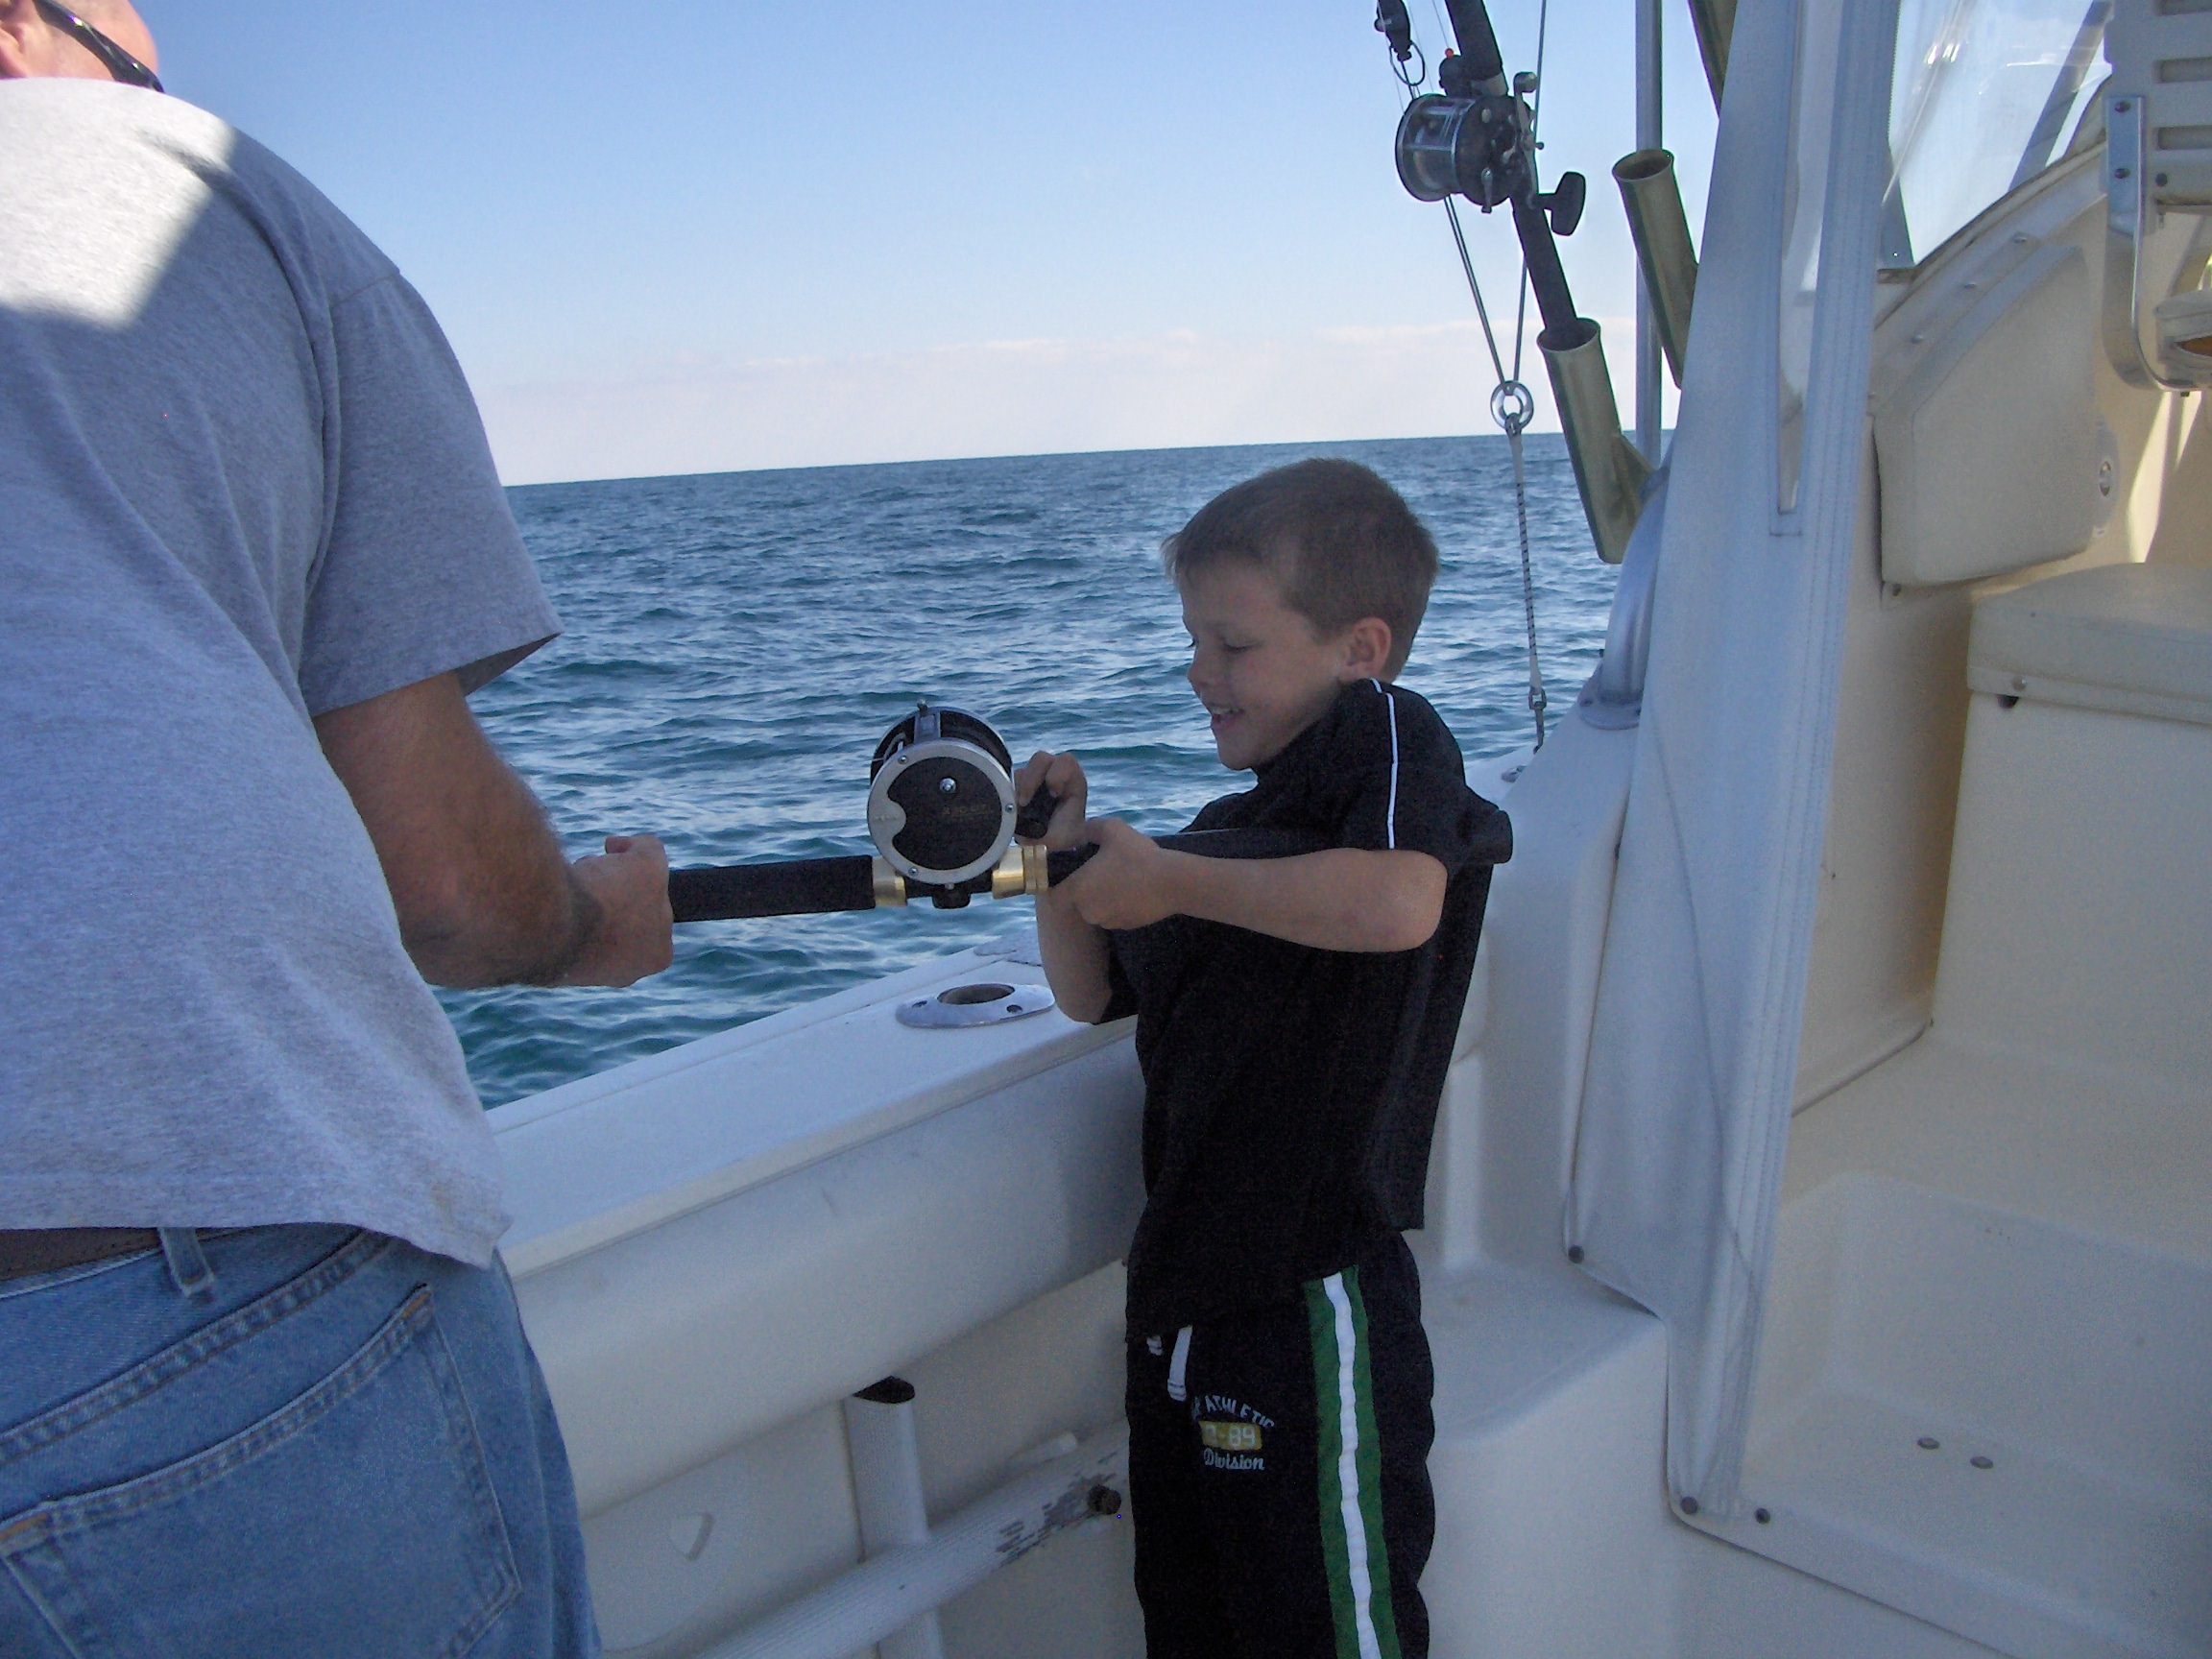 Landon gets some help with his grouper:)